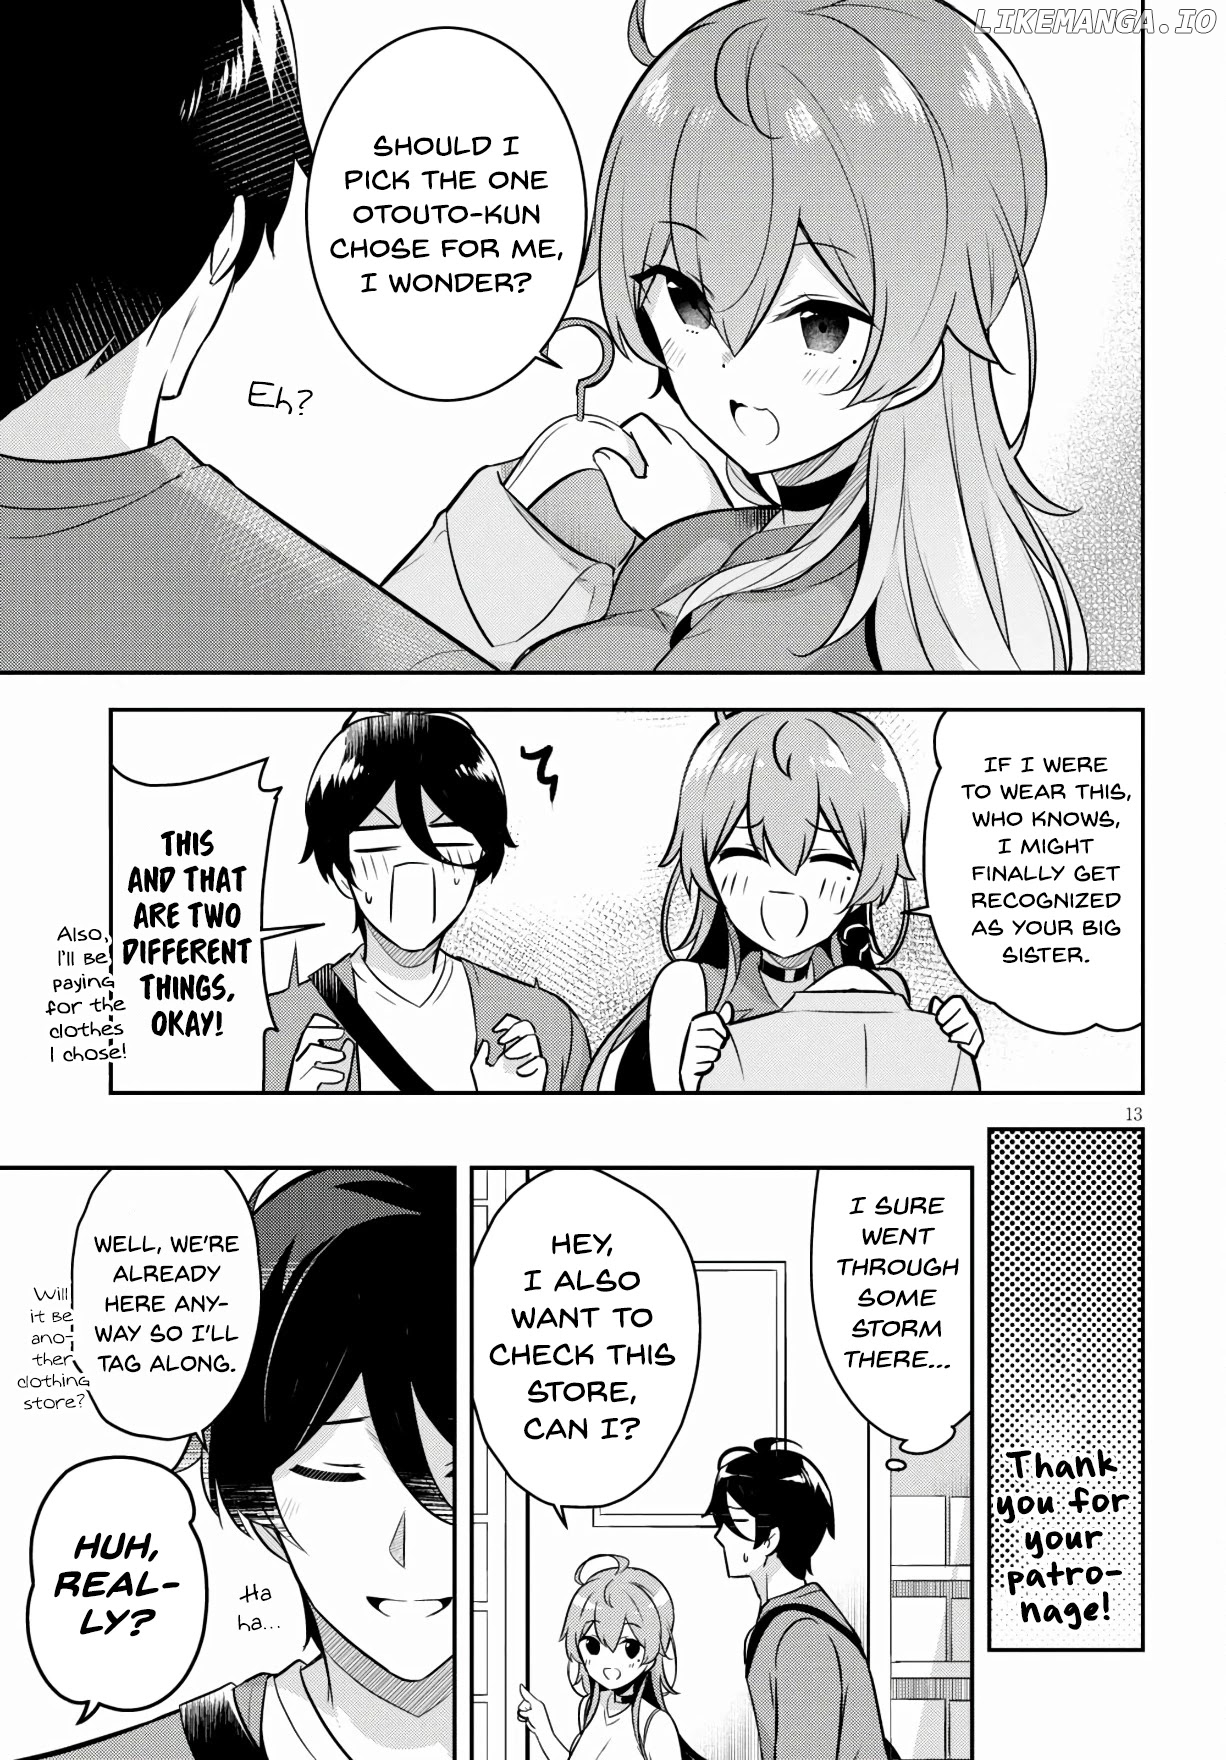 I Suddenly Have An "older" Sister! chapter 3 - page 14